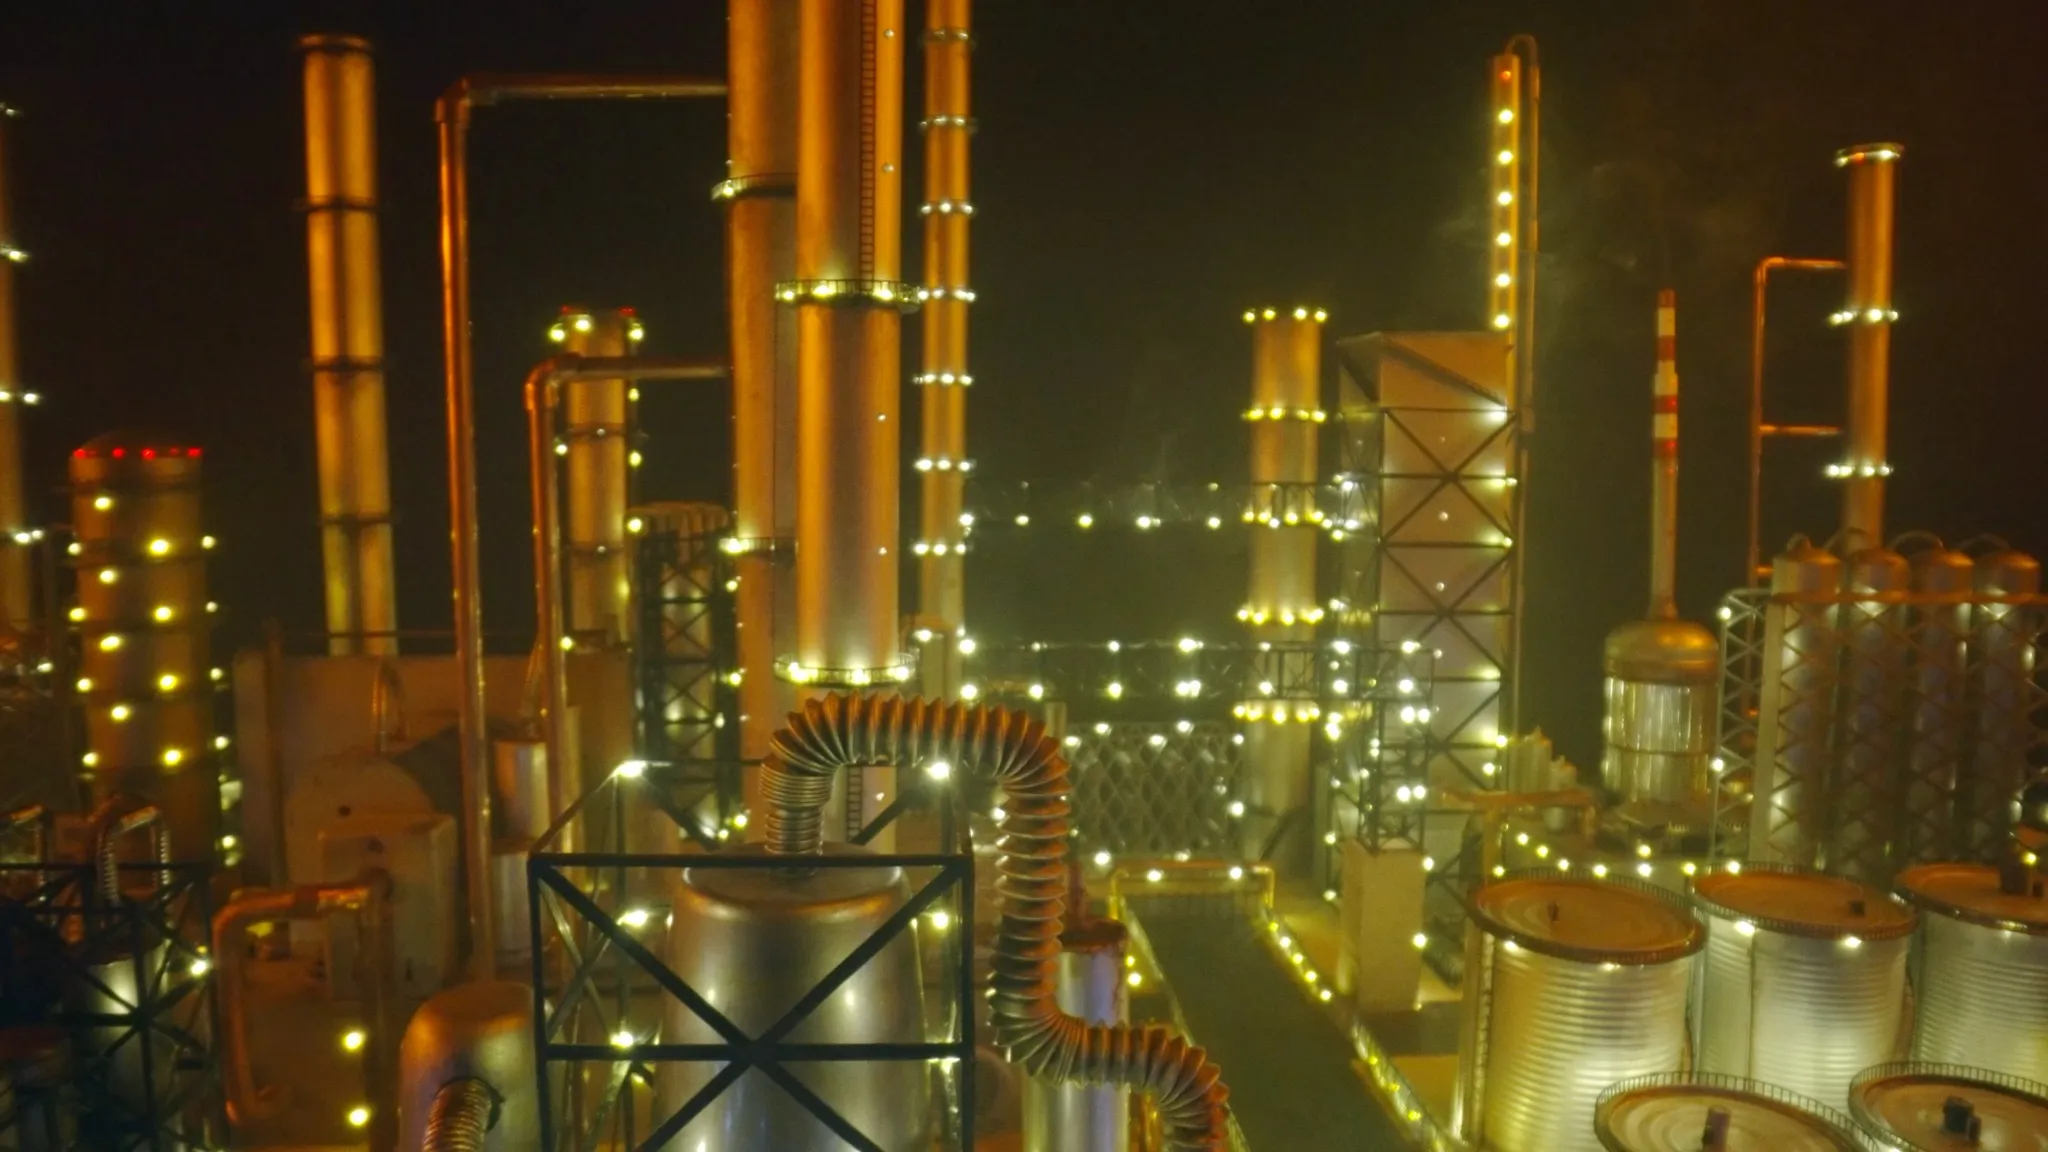 An oil refinery industrial zone aglow at night, bathed in an ambient orange hue amidst a smog-laden atmosphere.